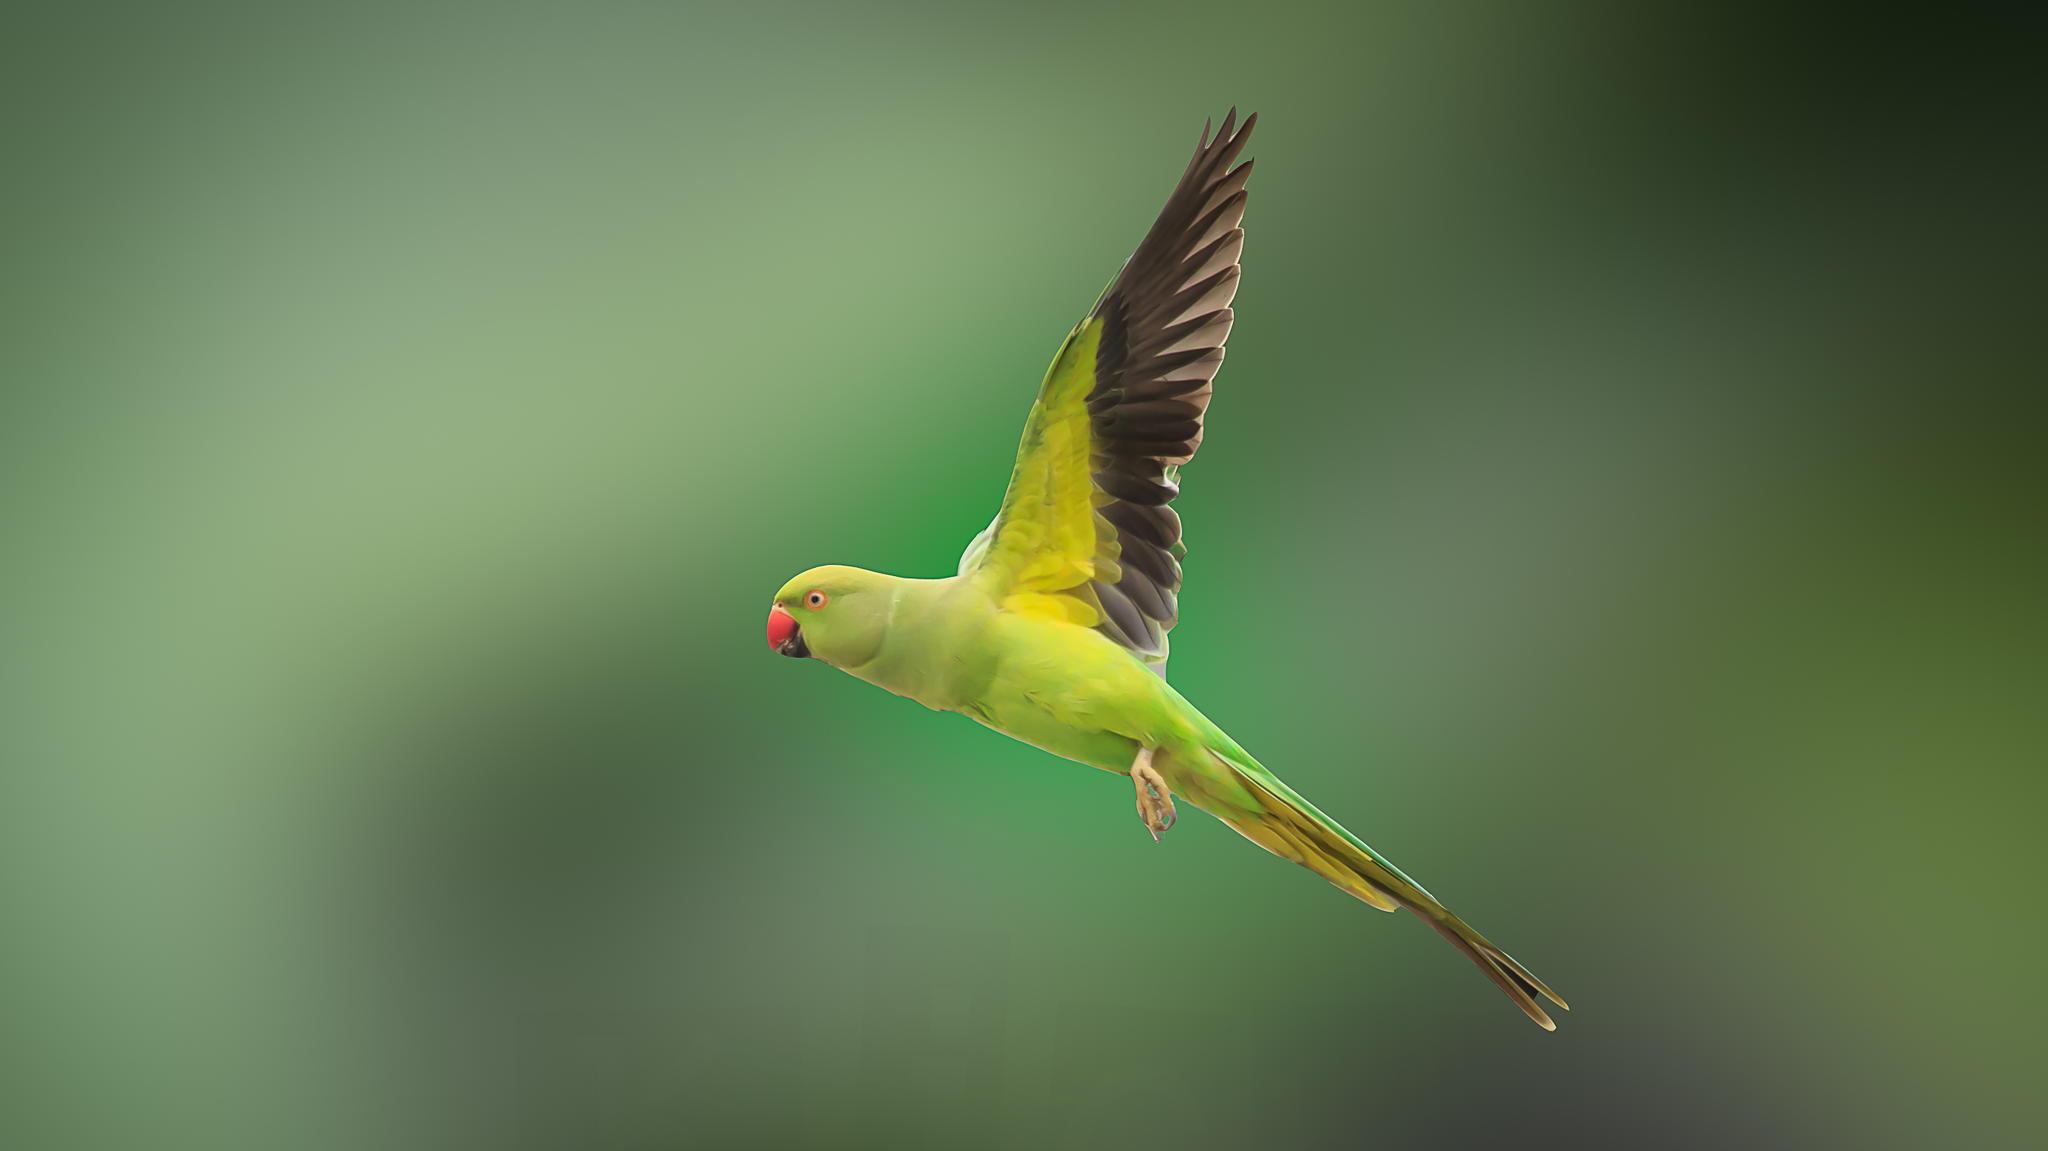 Wallpaper Green and Yellow Bird Flying Background   Download Free